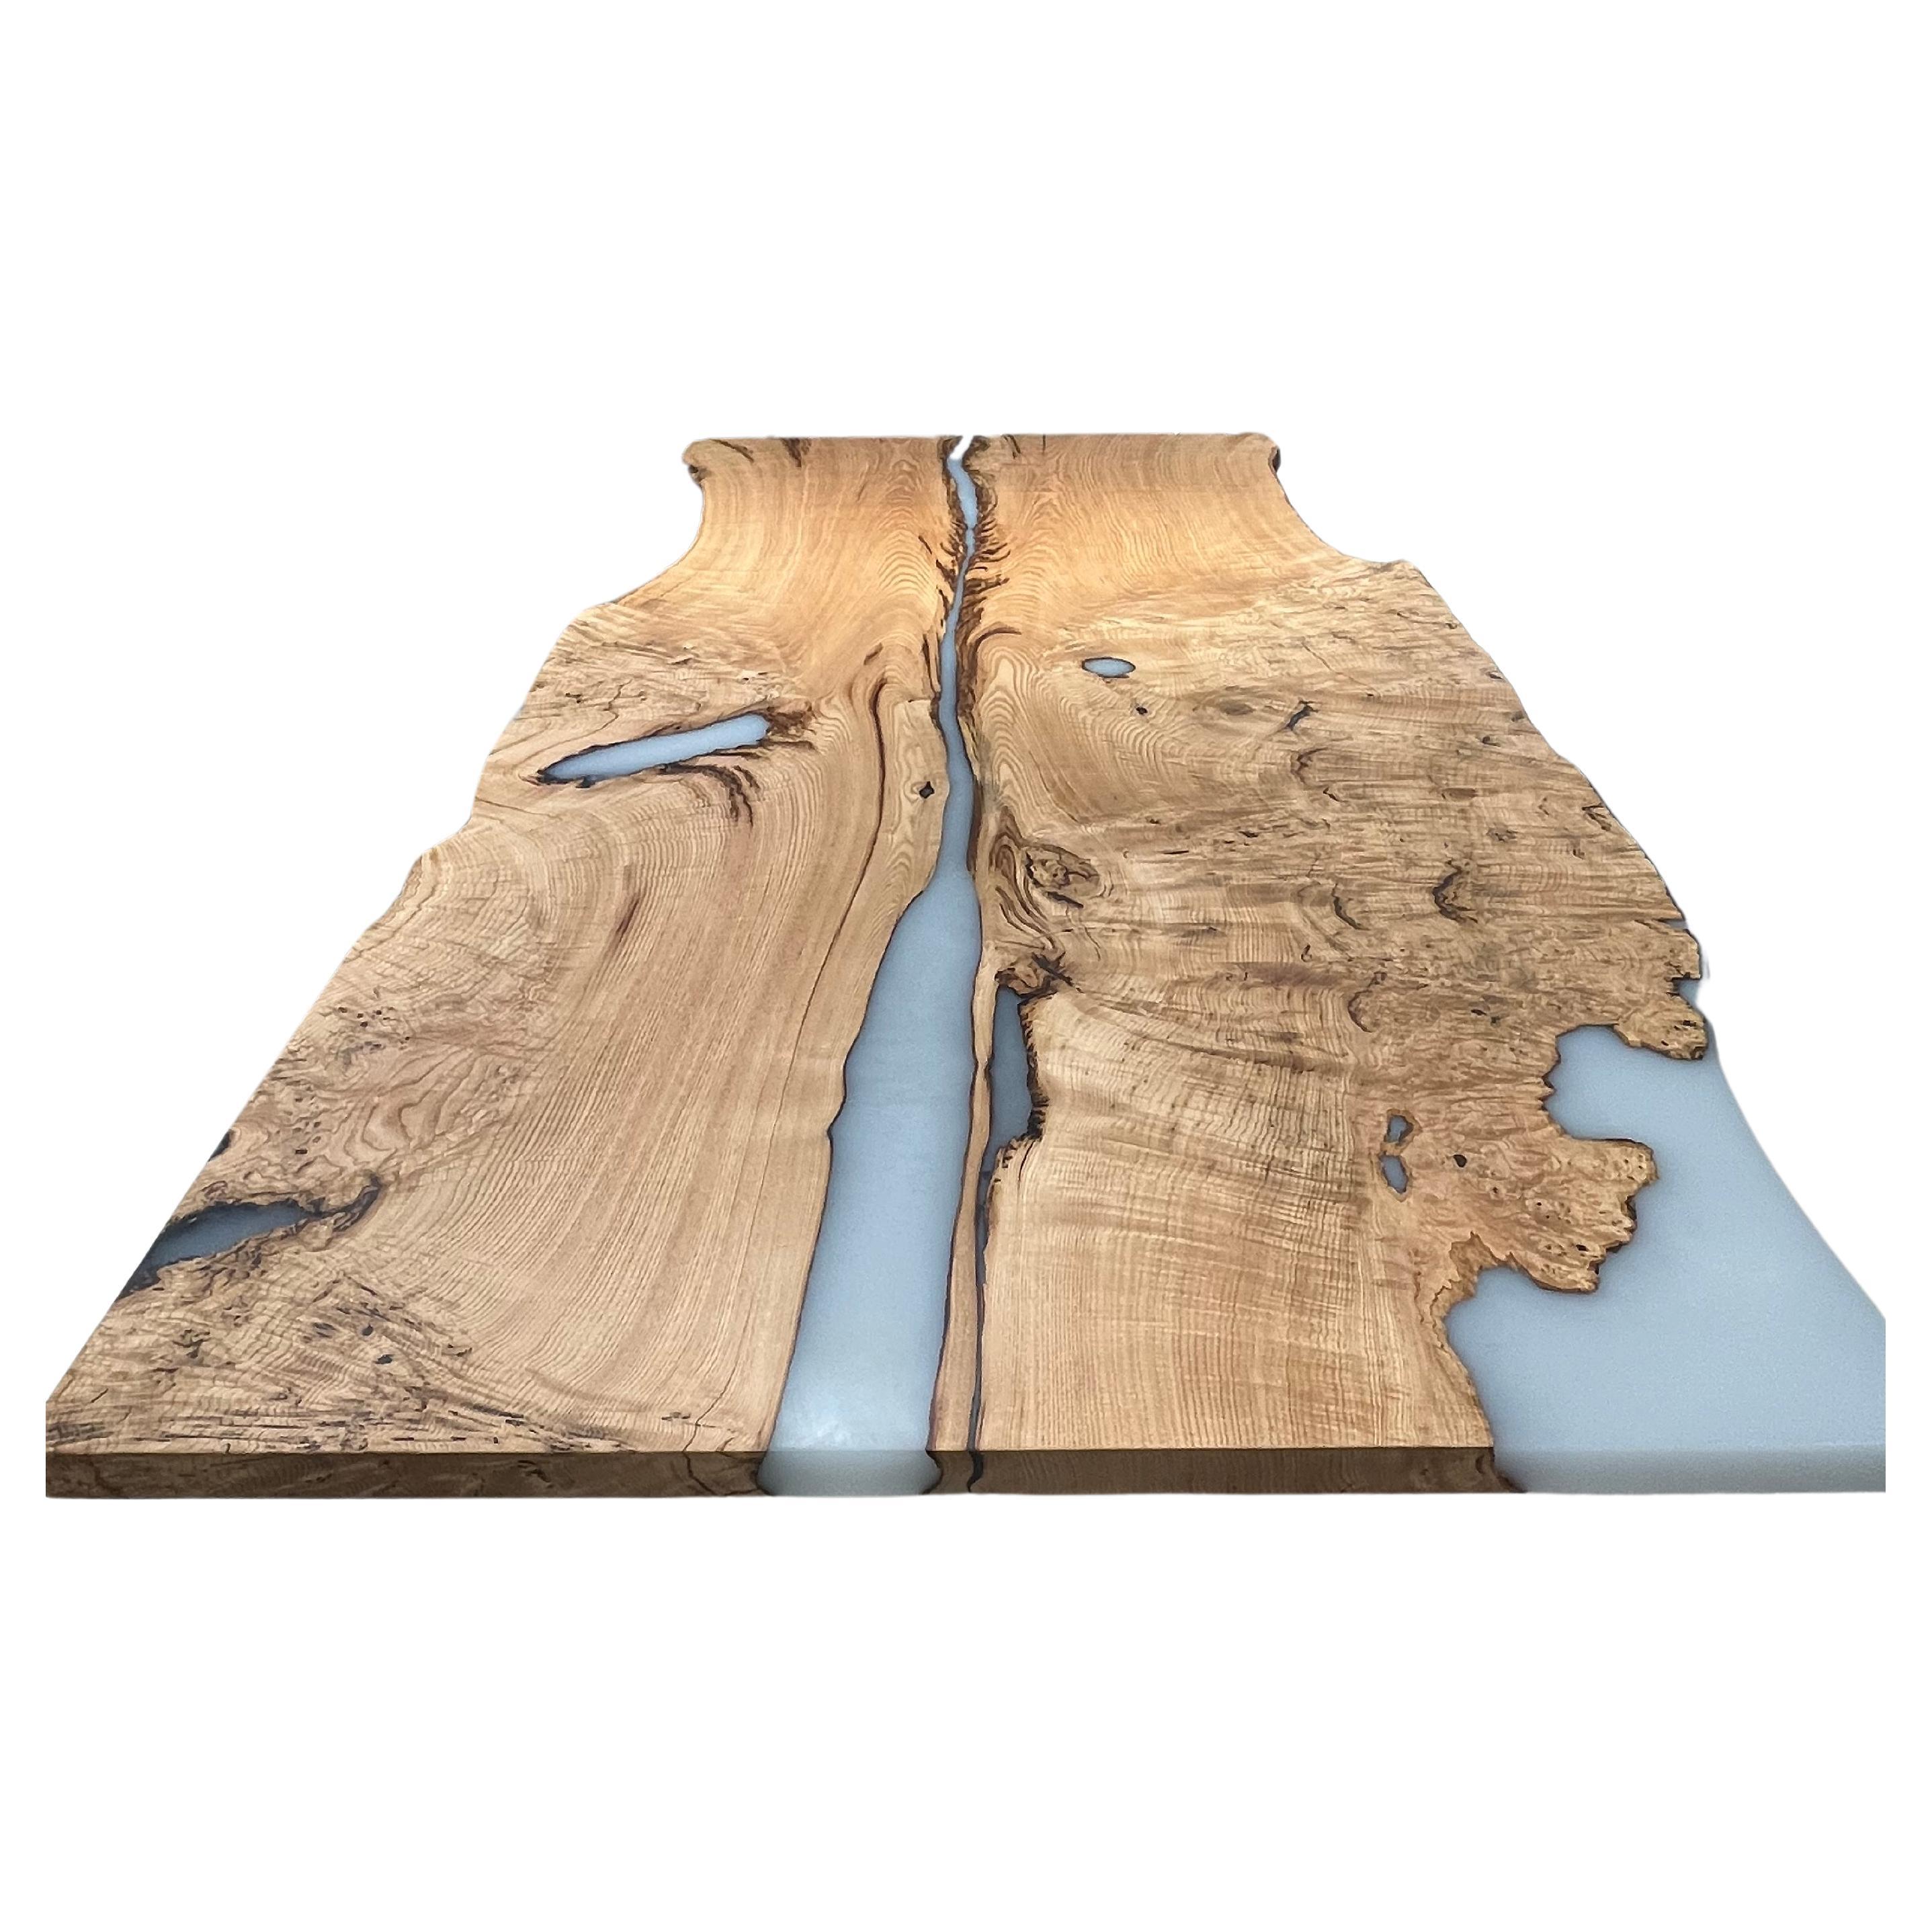 Light Wood Epoxy Resin Conference Table